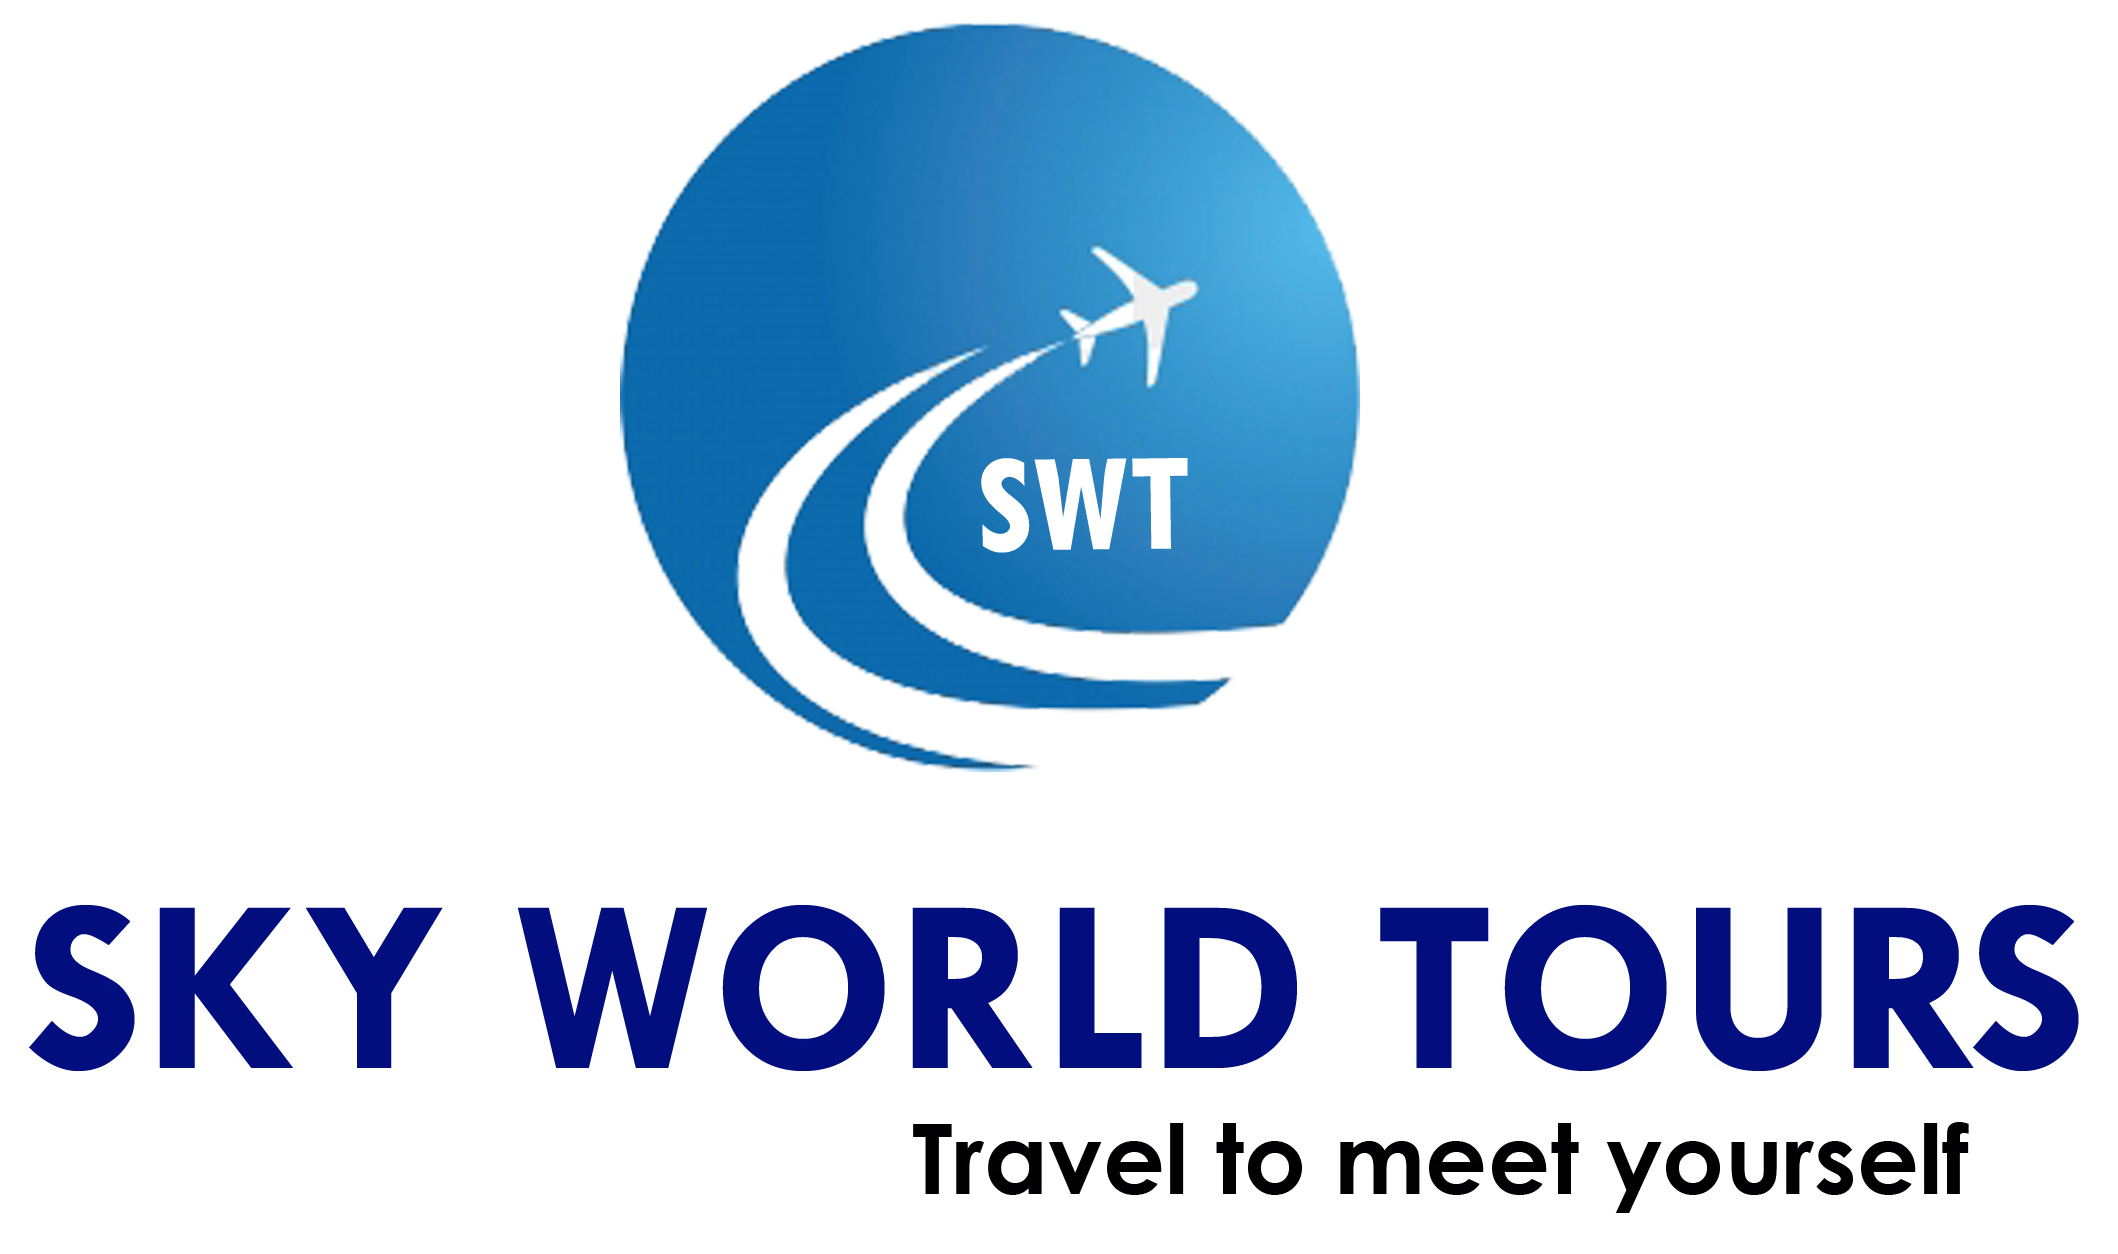 sky world travel and tours